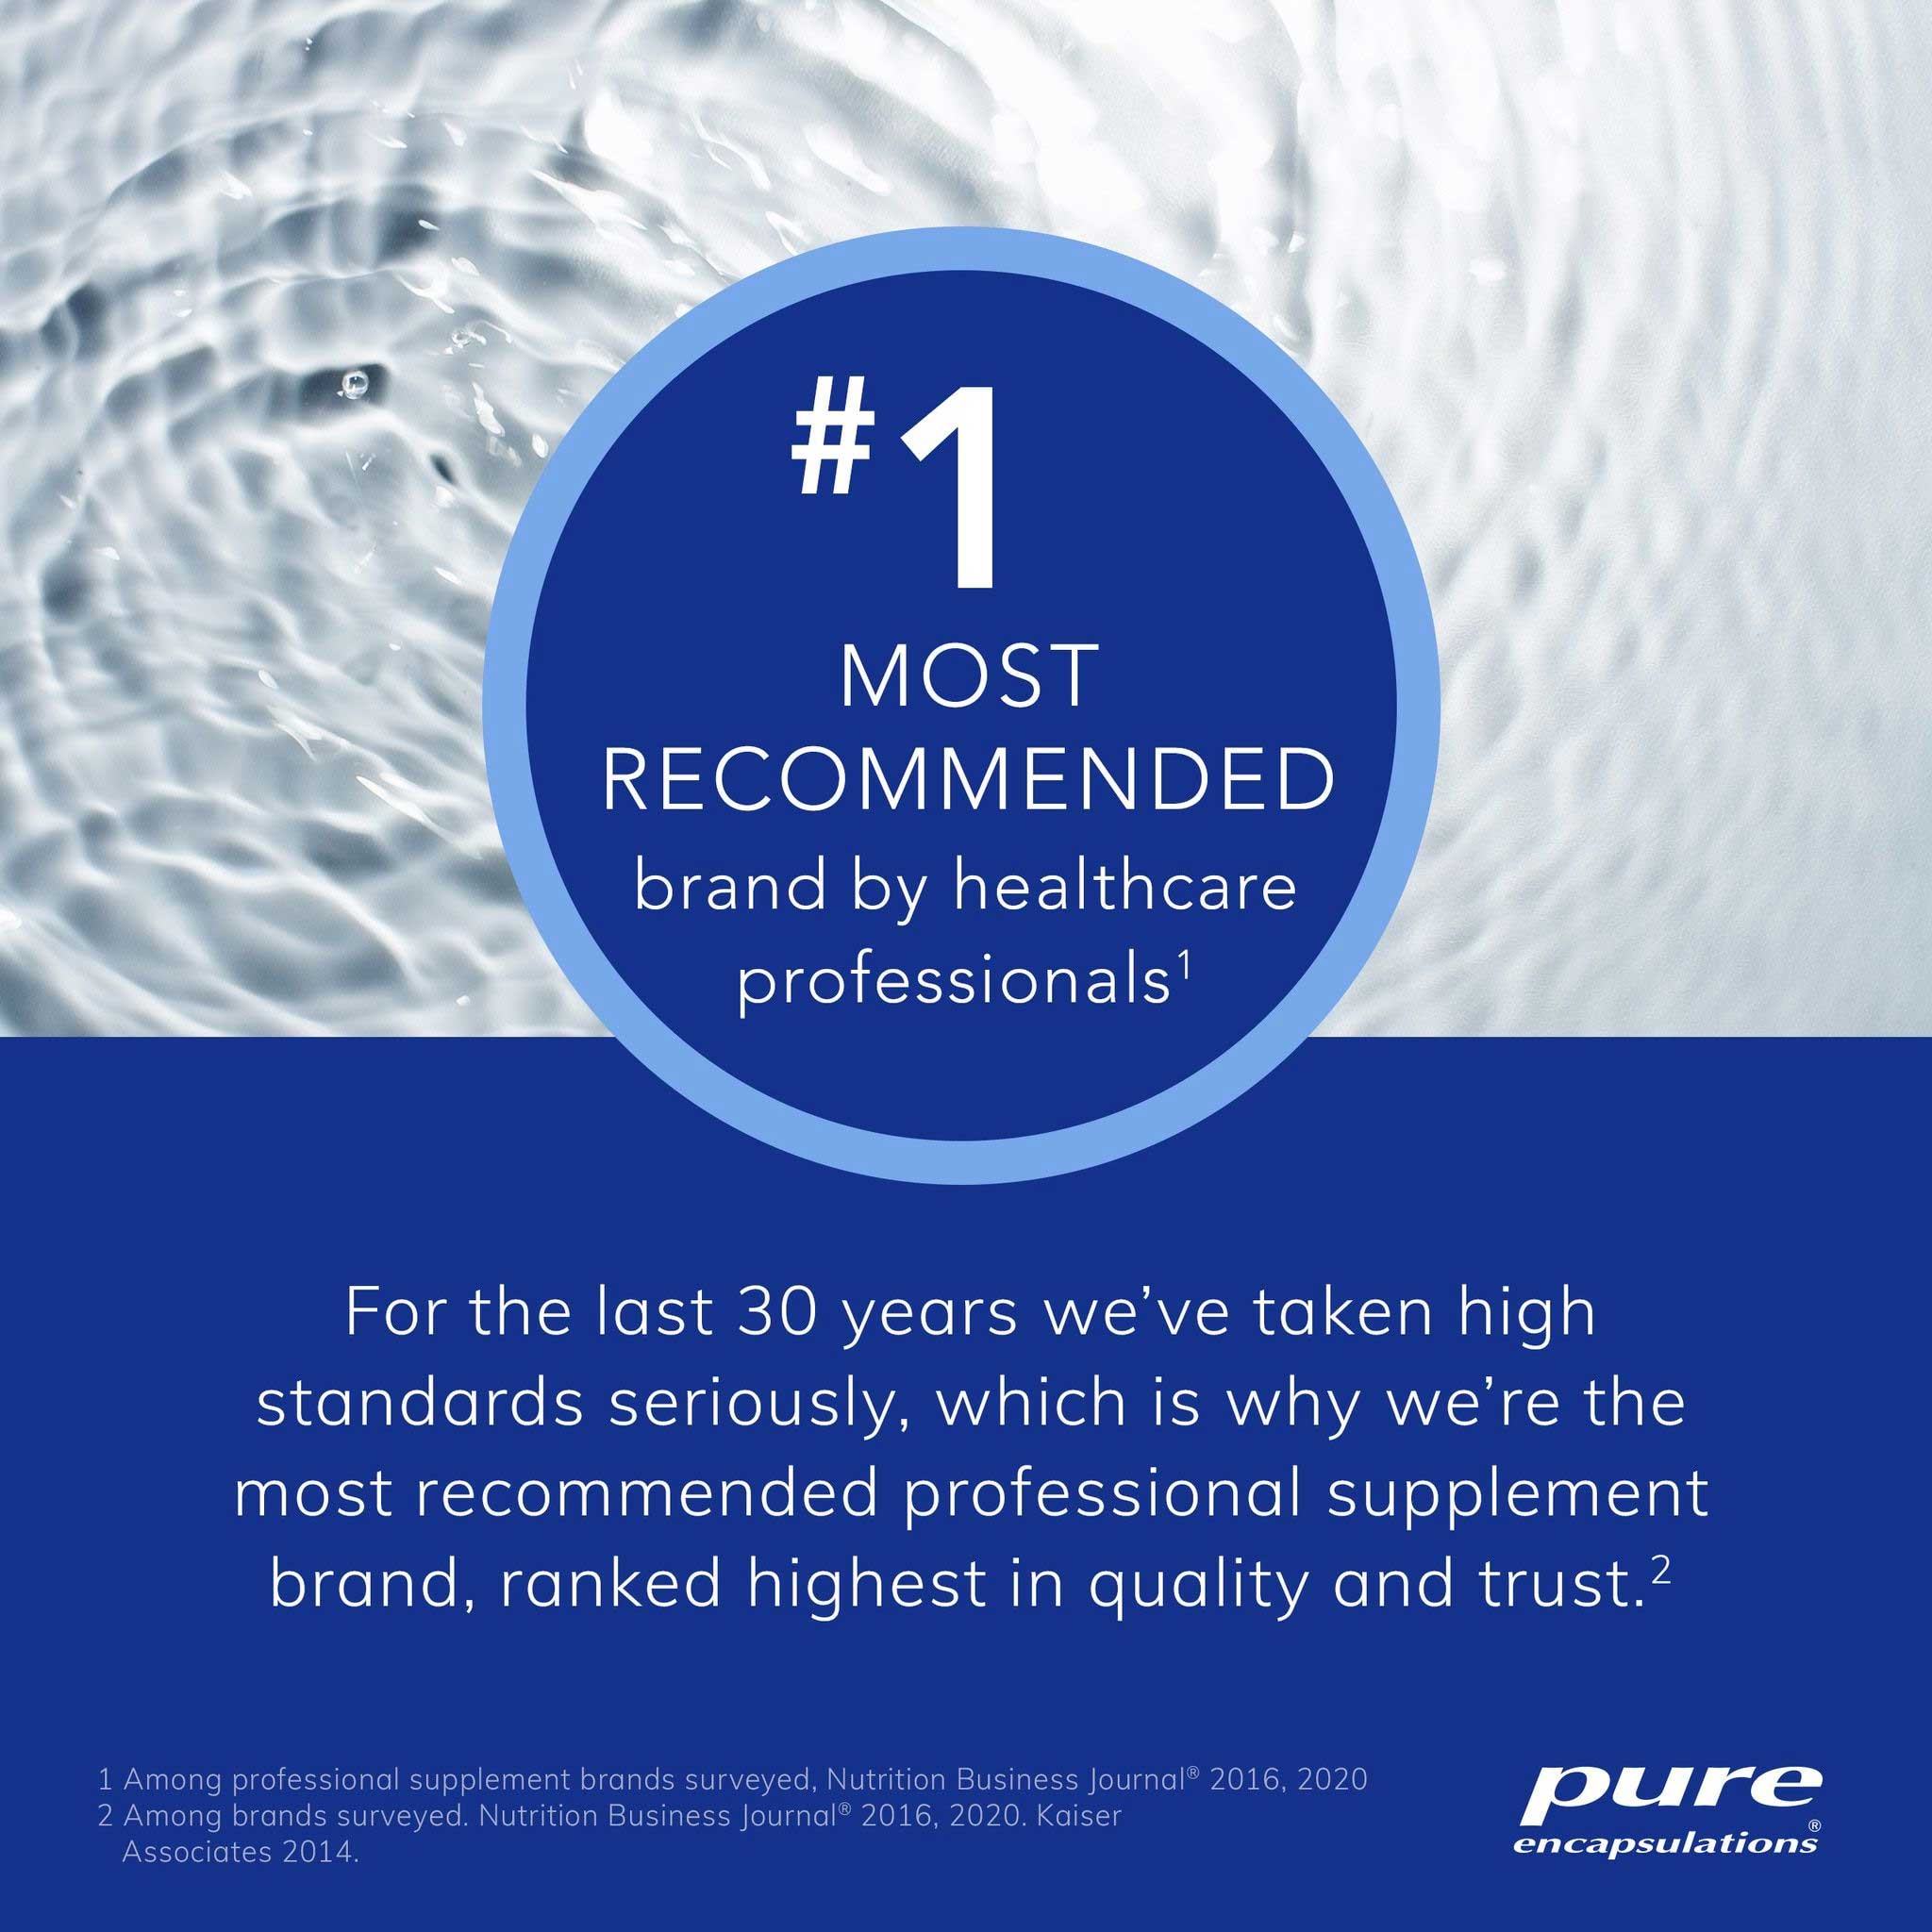 Pure Encapsulations Nutrient 950 Most Recommended Brand